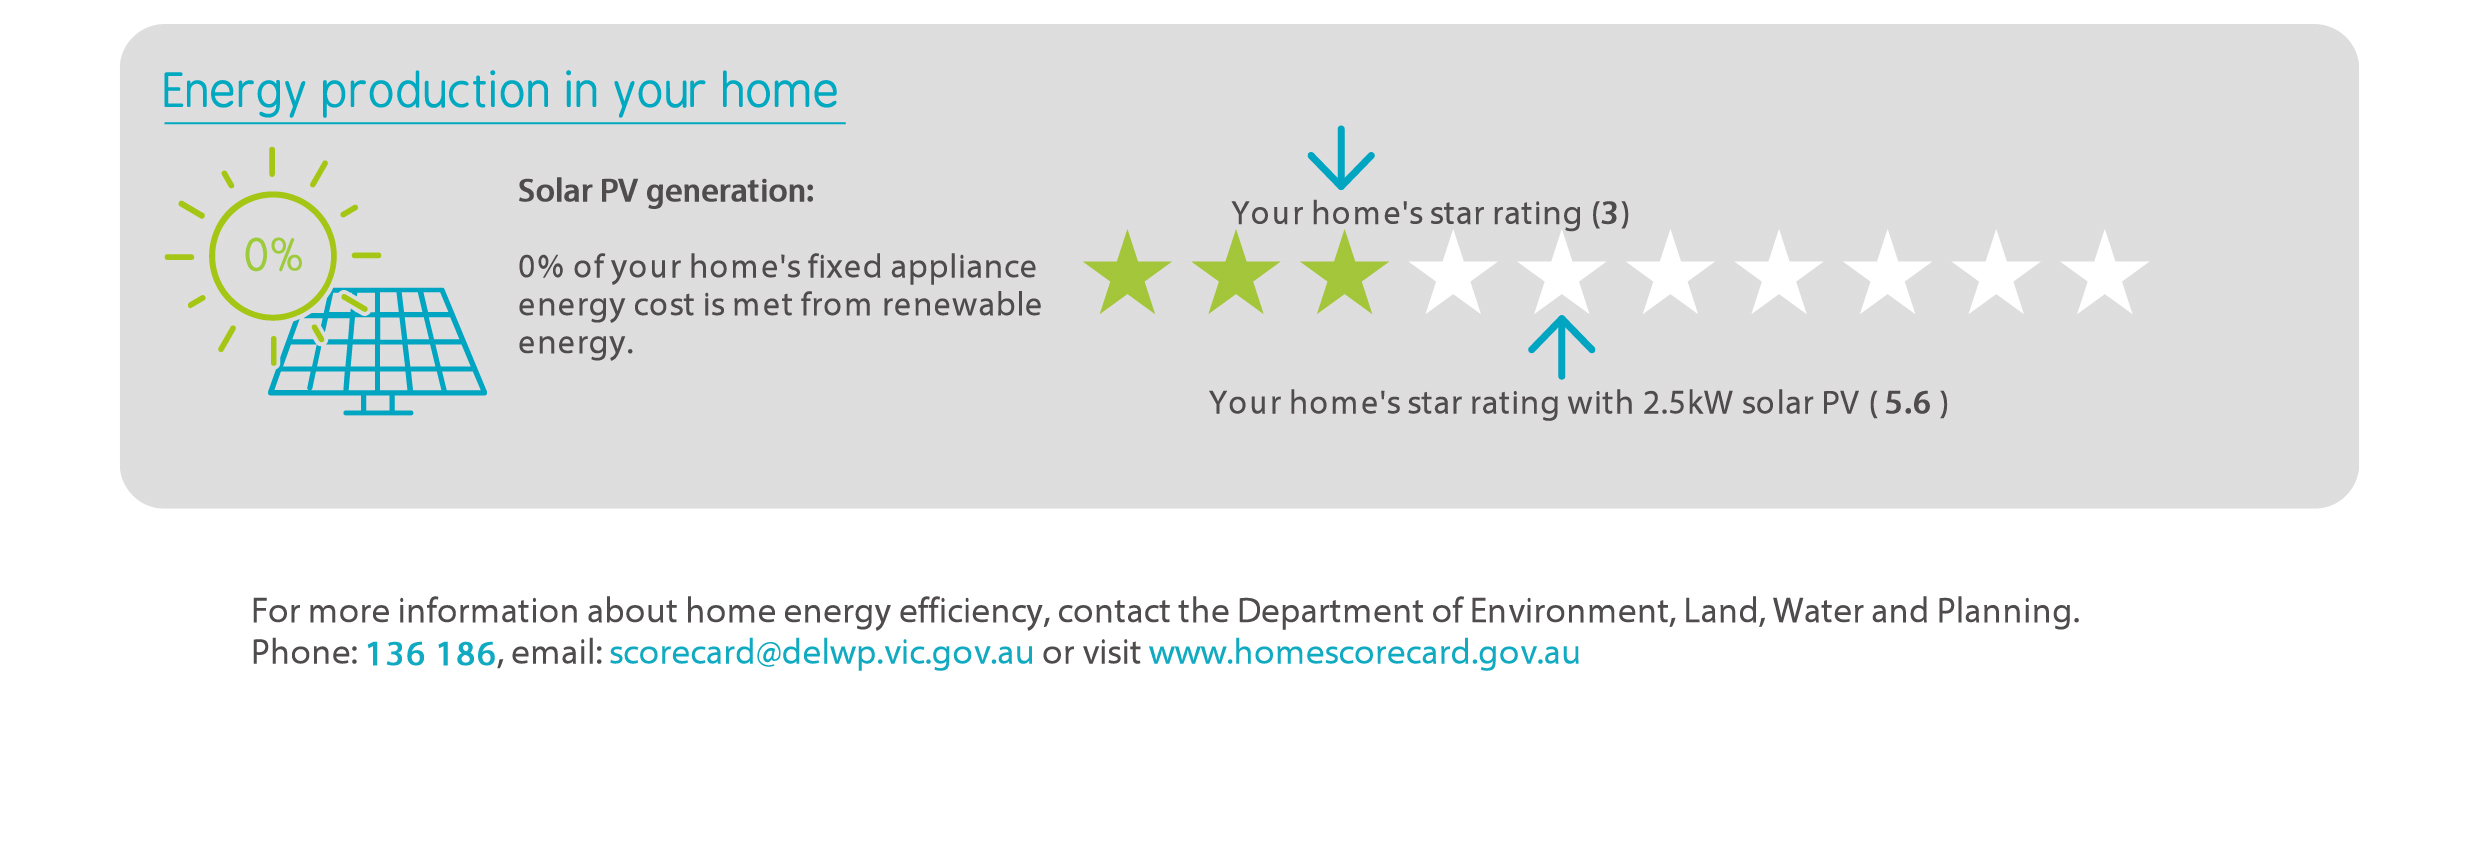 Energy production in your home section of the Scorecard certificate